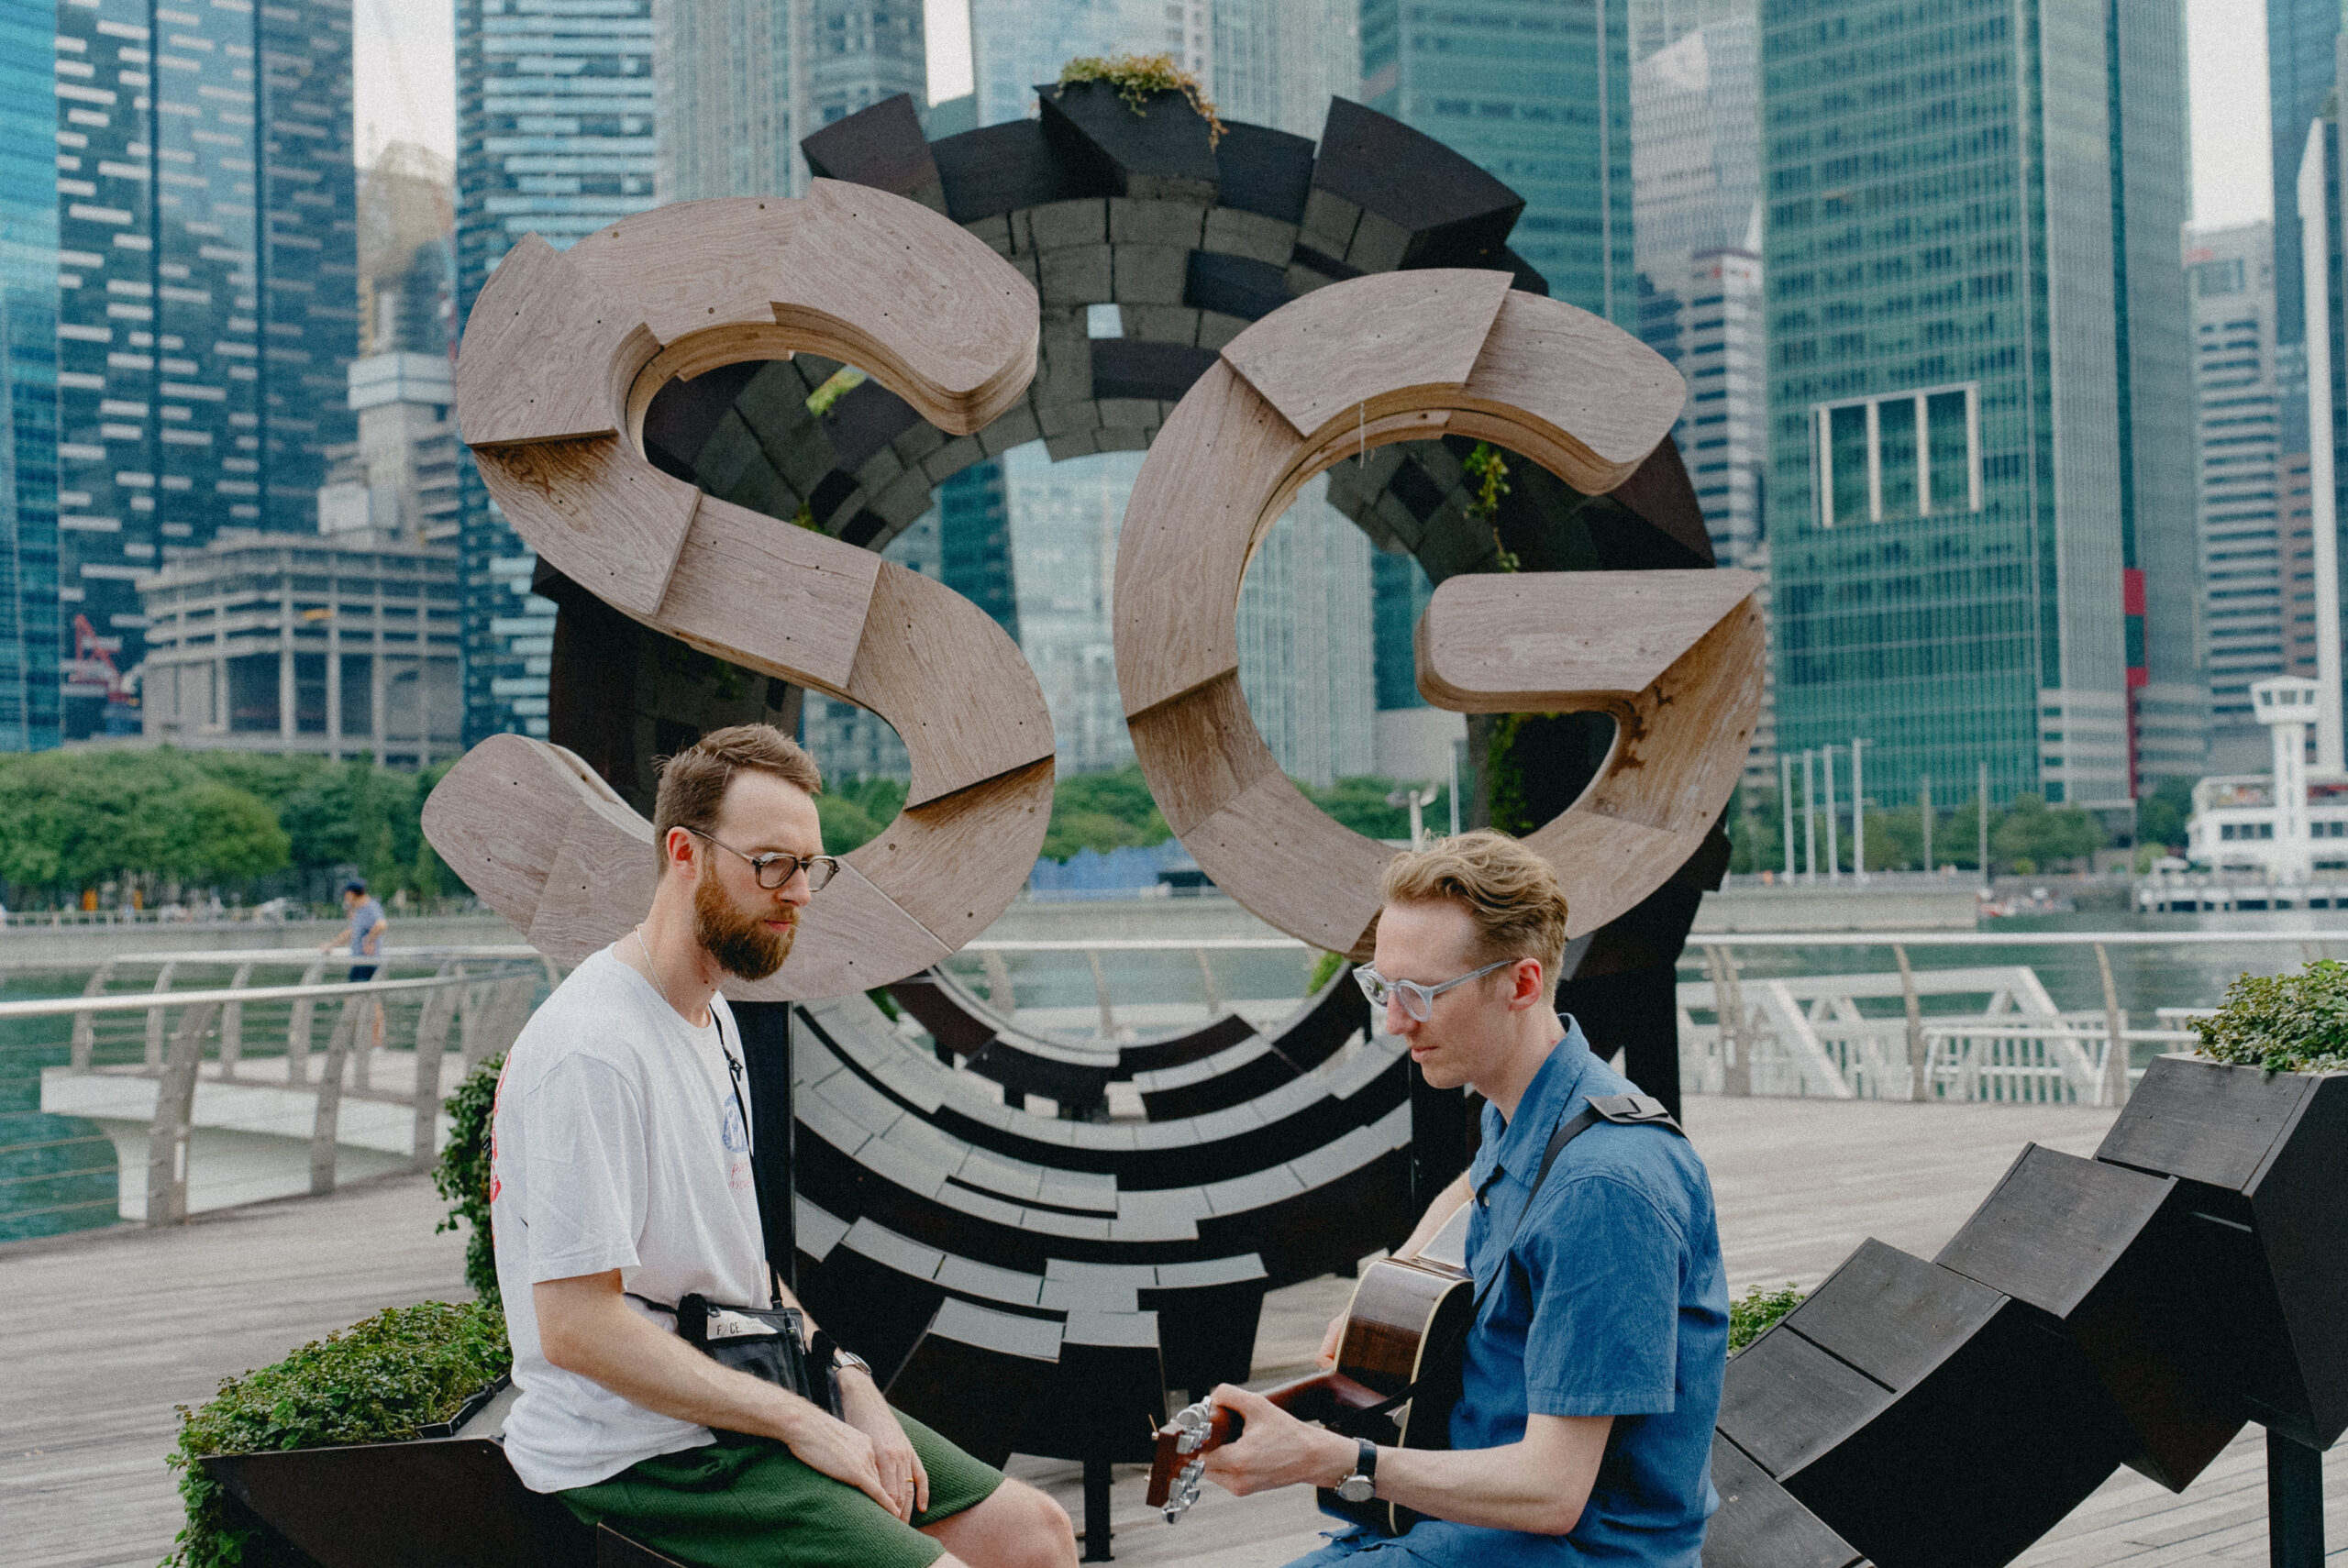 SINGAPORE TOURISM BOARD, WARNER MUSIC SINGAPORE, AND HONNE TAKE AN “INSIDE-OUT” LOOK AT SINGAPORE